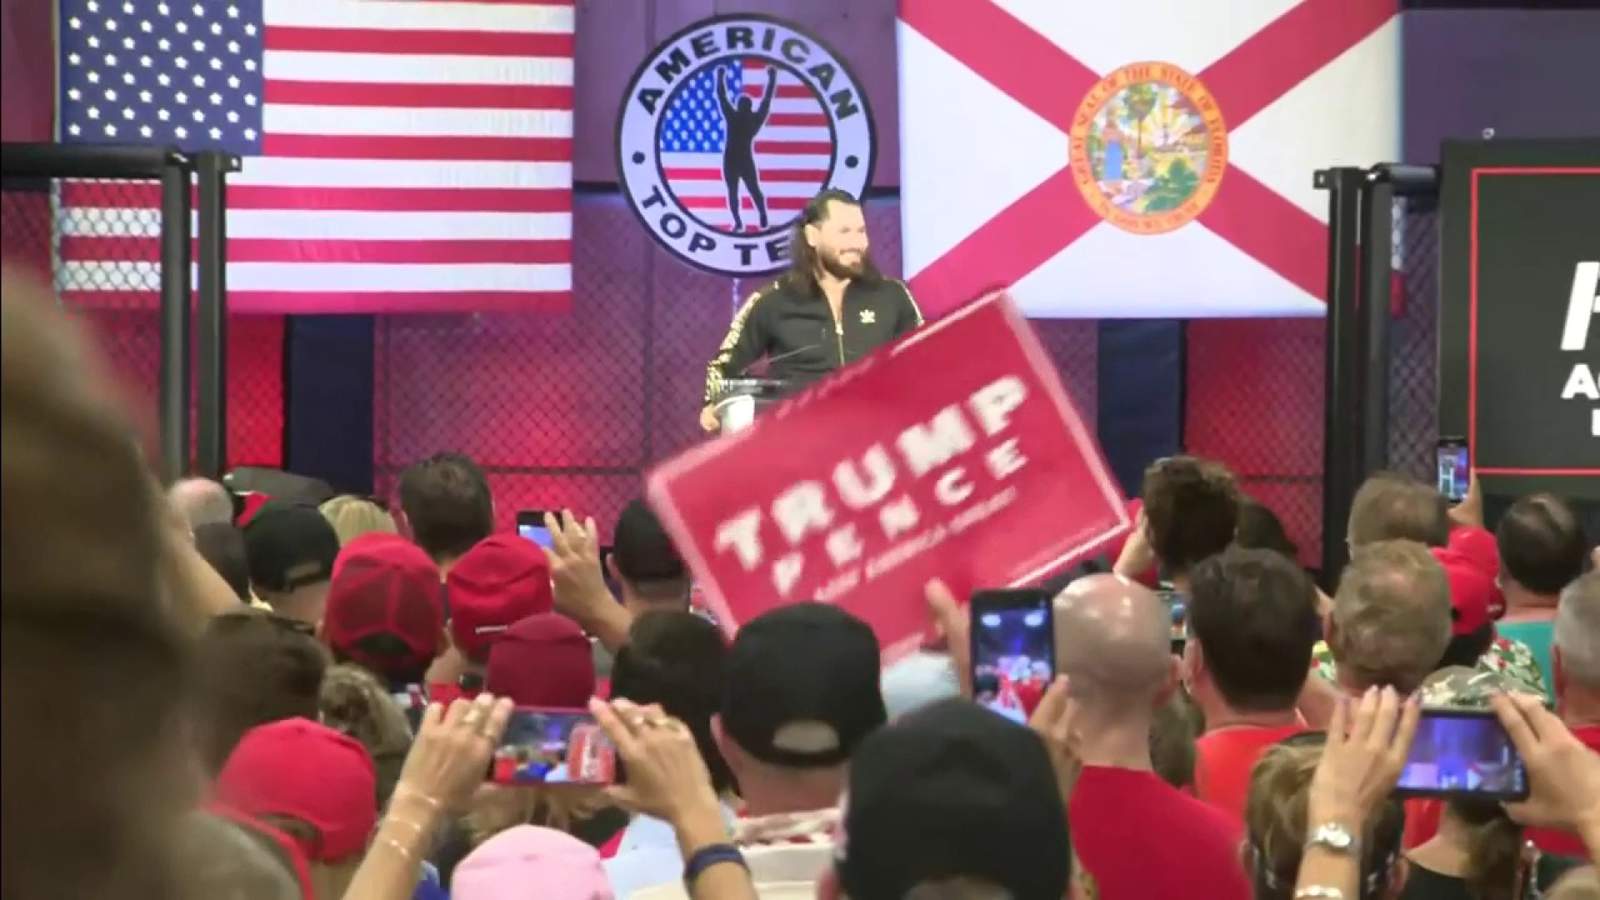 Trump Jr. campaigns for father in Coconut Creek with UFC superstar kicking off speeches